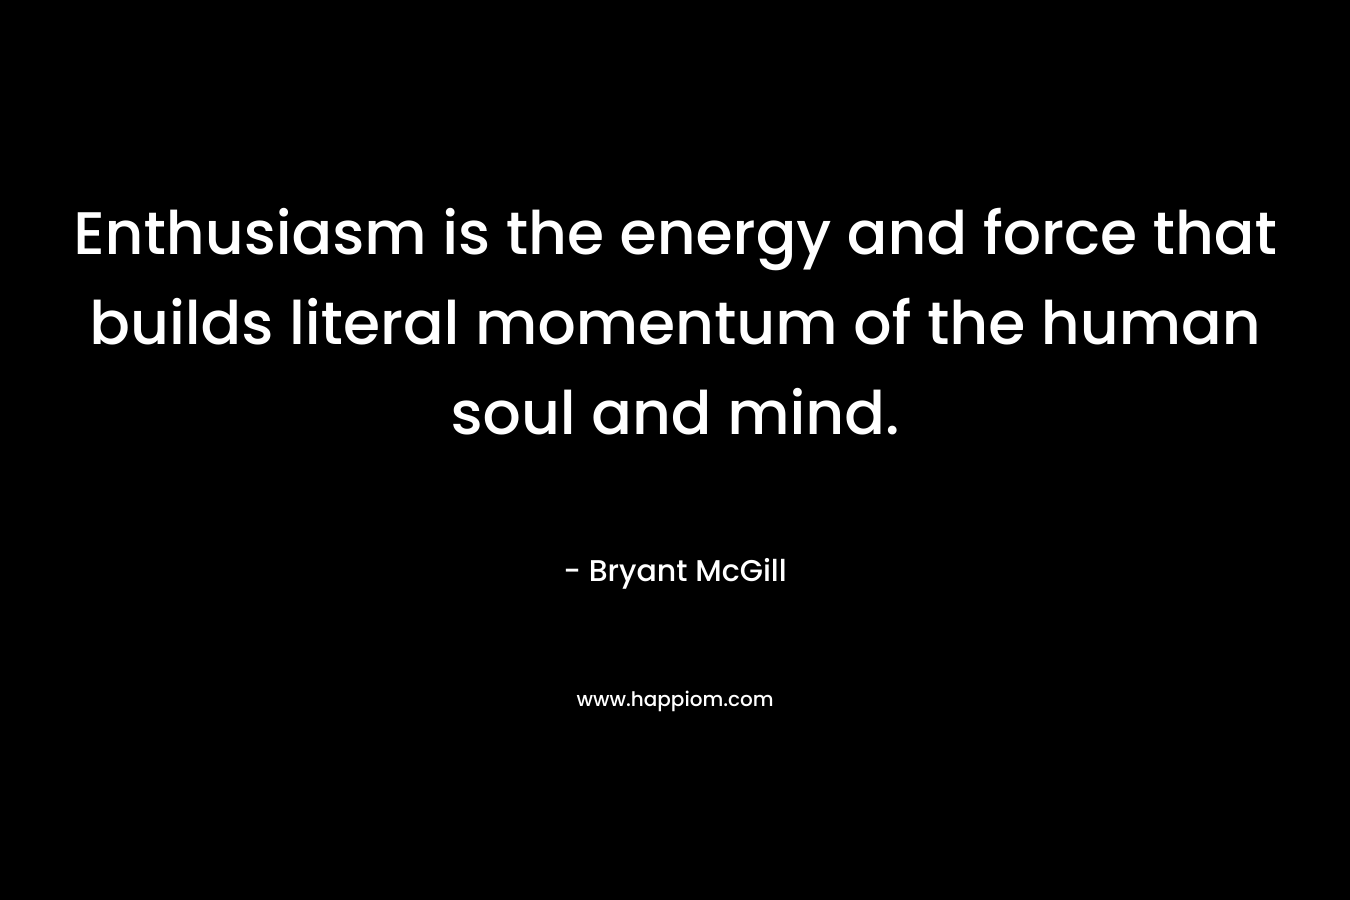 Enthusiasm is the energy and force that builds literal momentum of the human soul and mind. – Bryant McGill